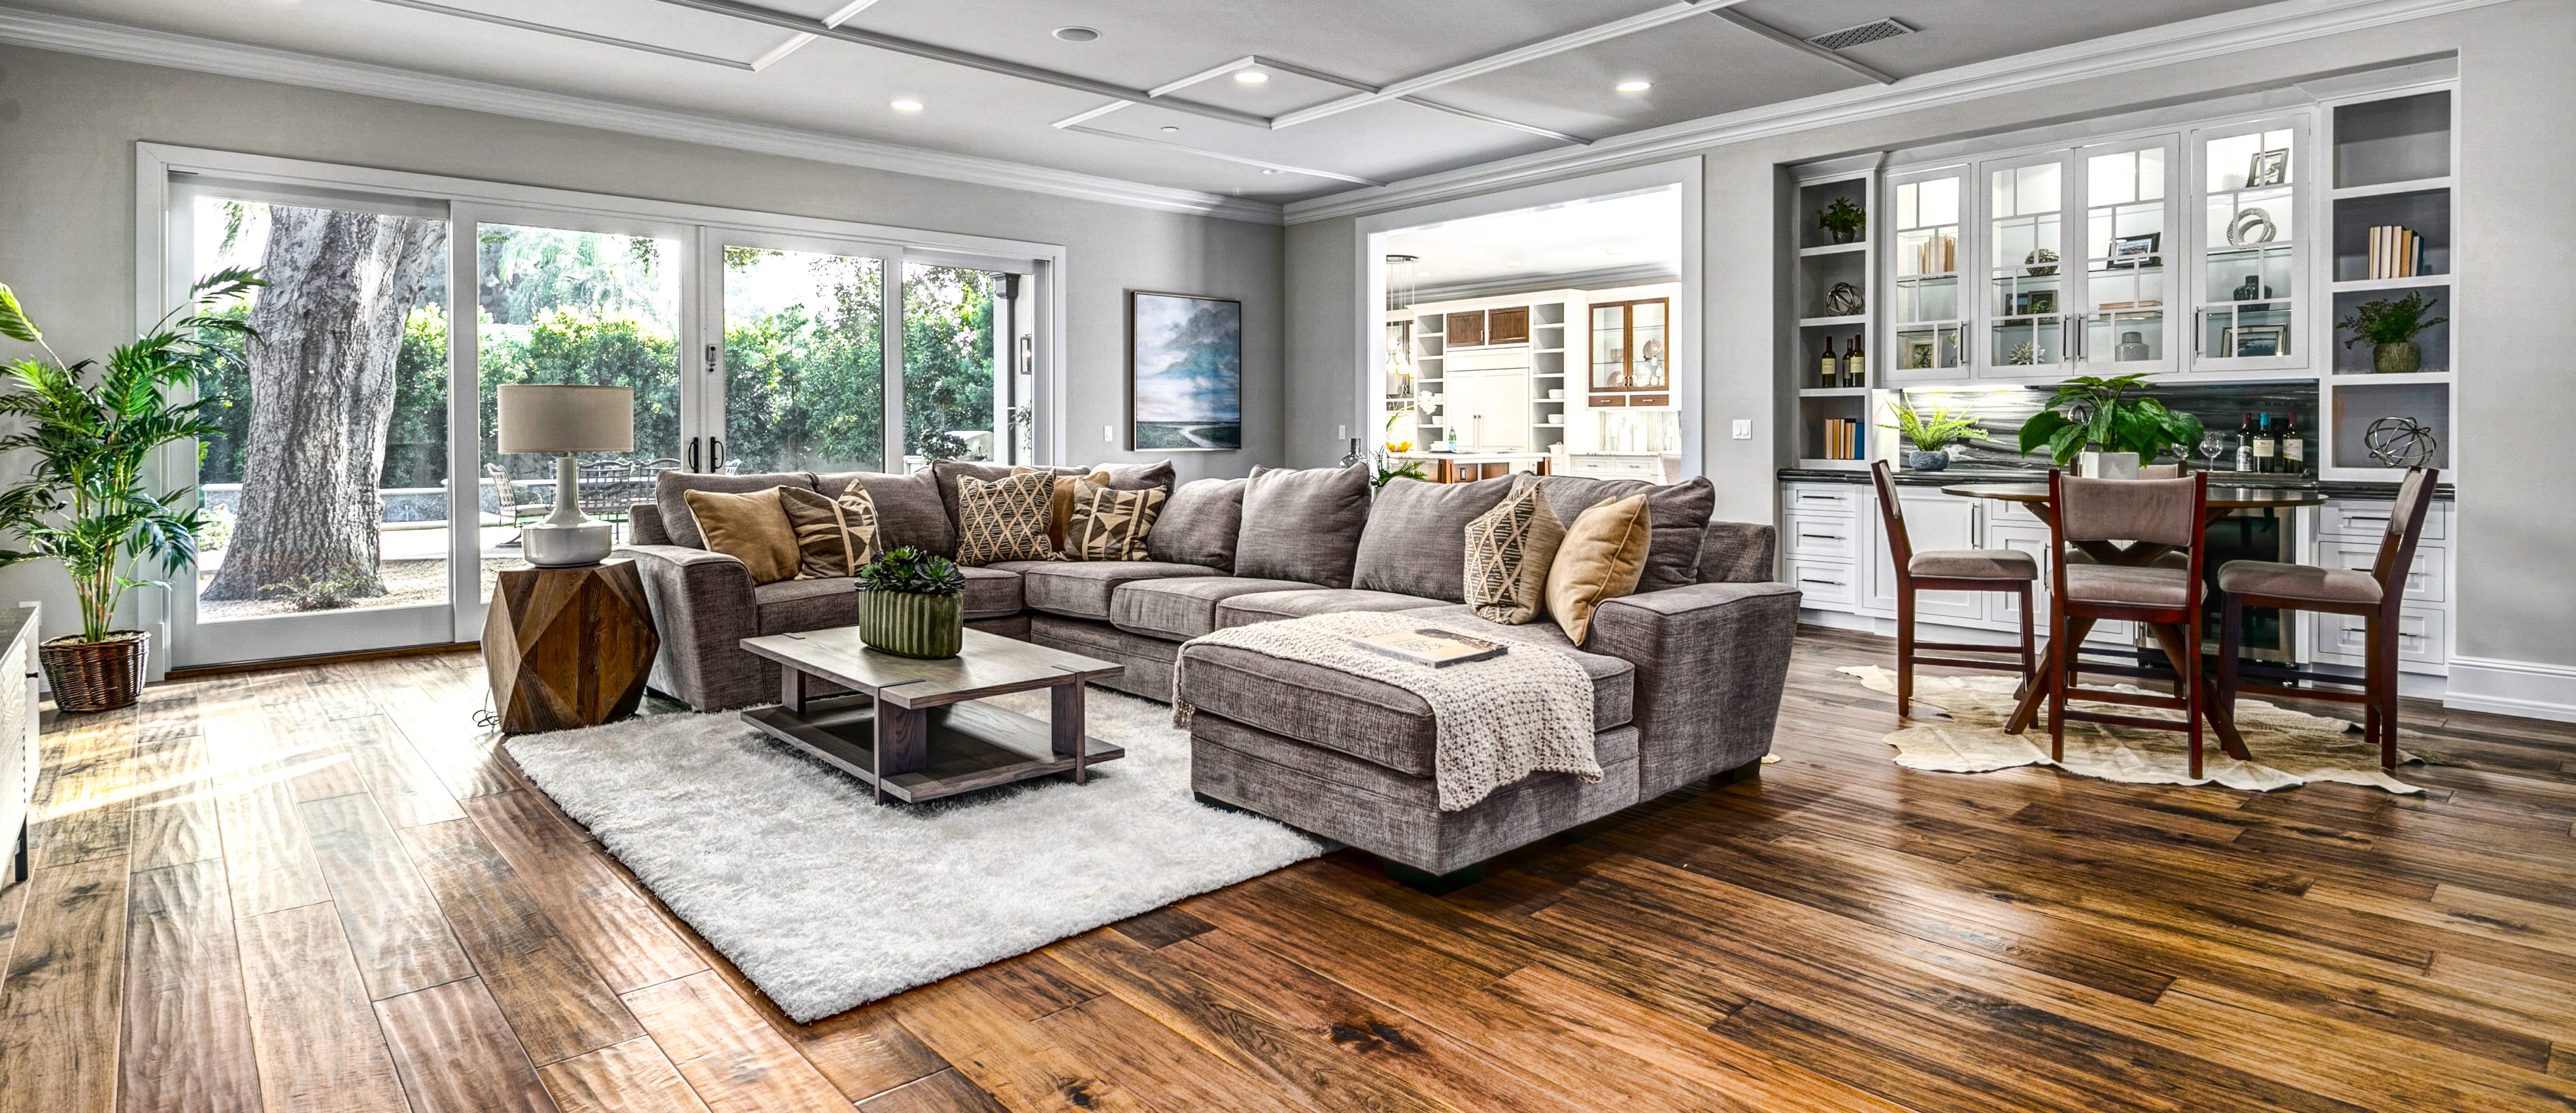 luxury home staging family room